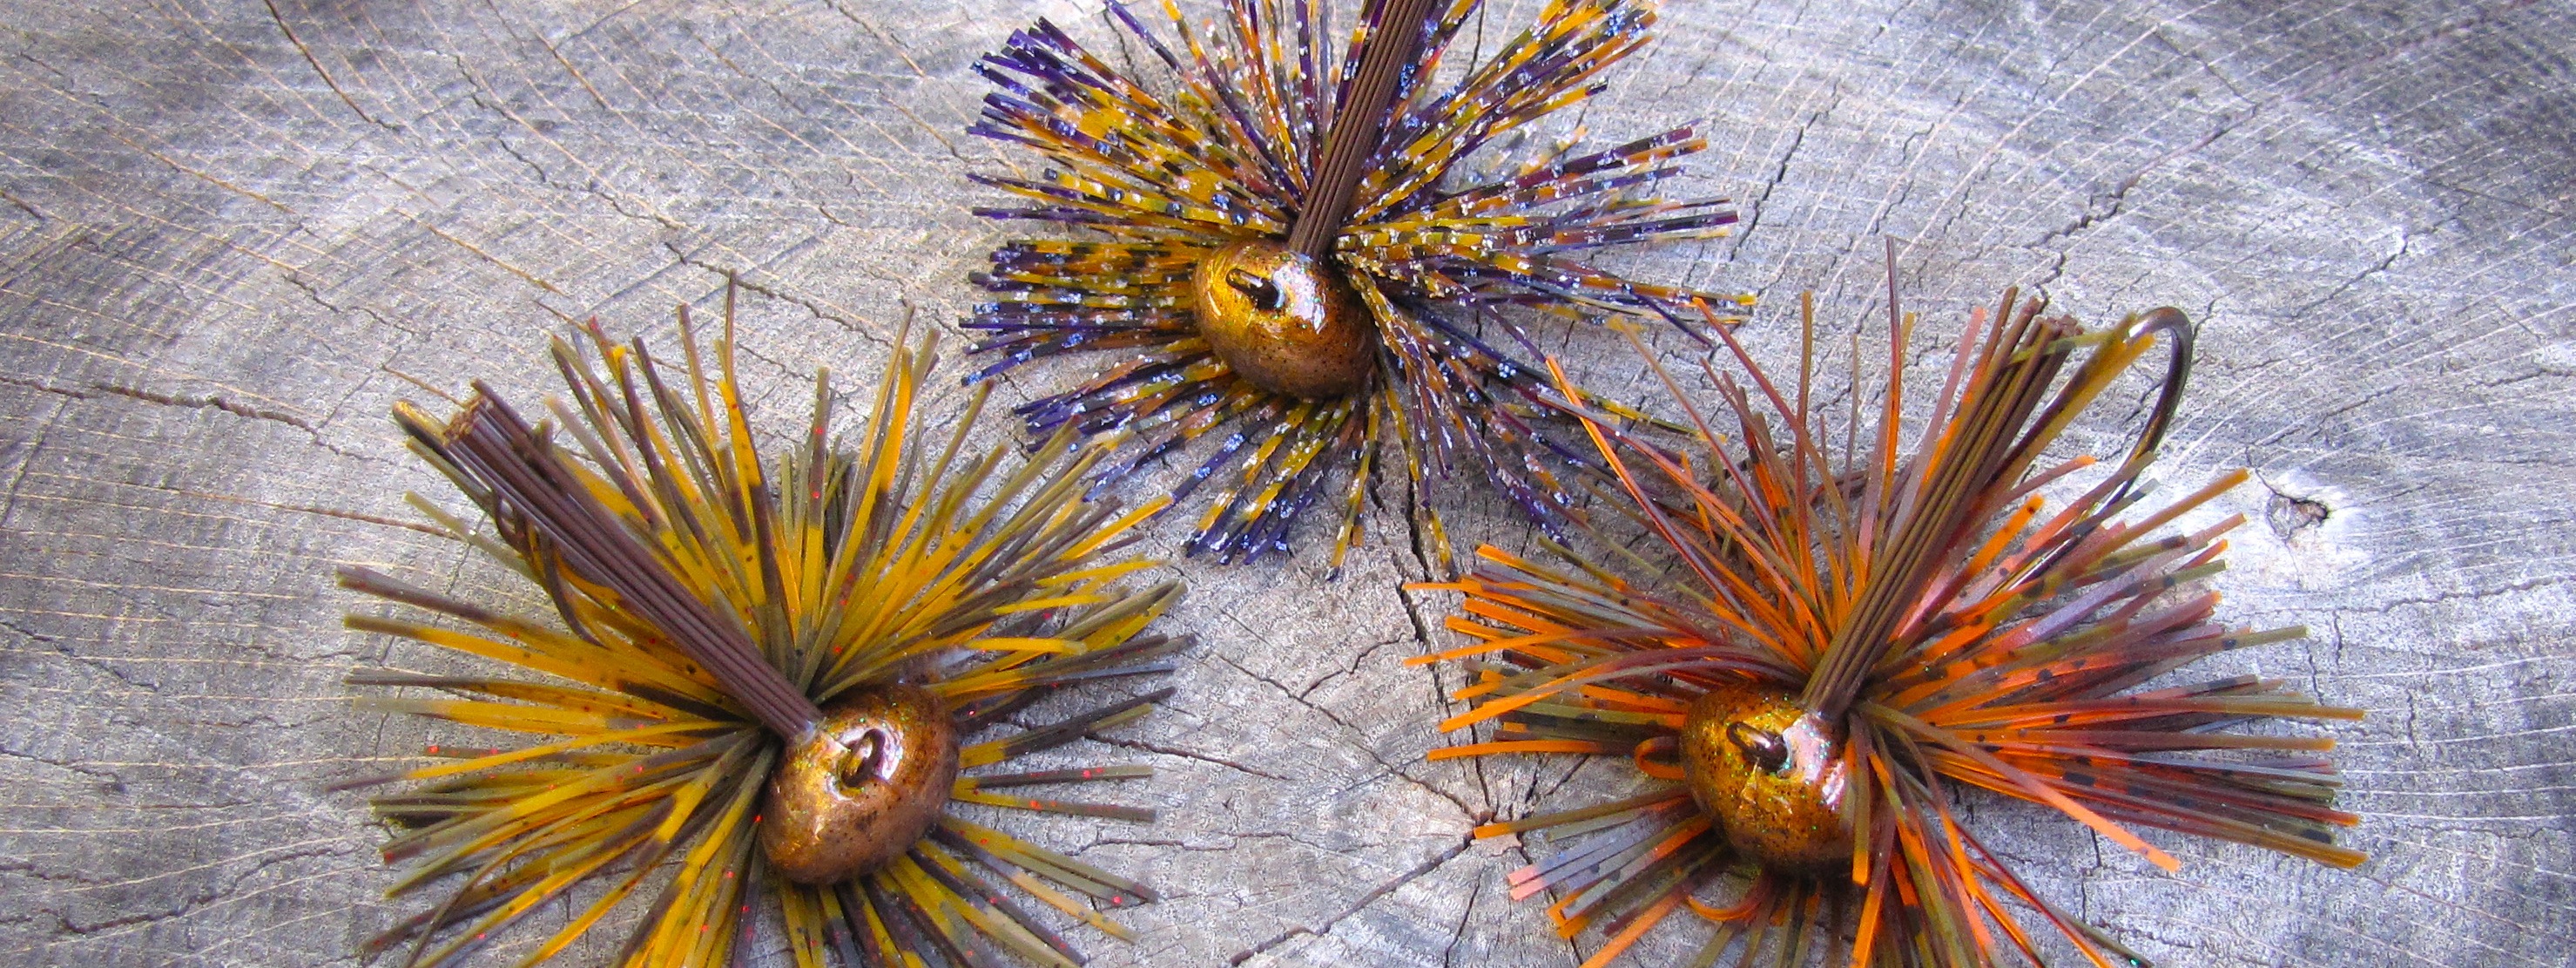 Fishing Frugal Lures Puffy Jigs